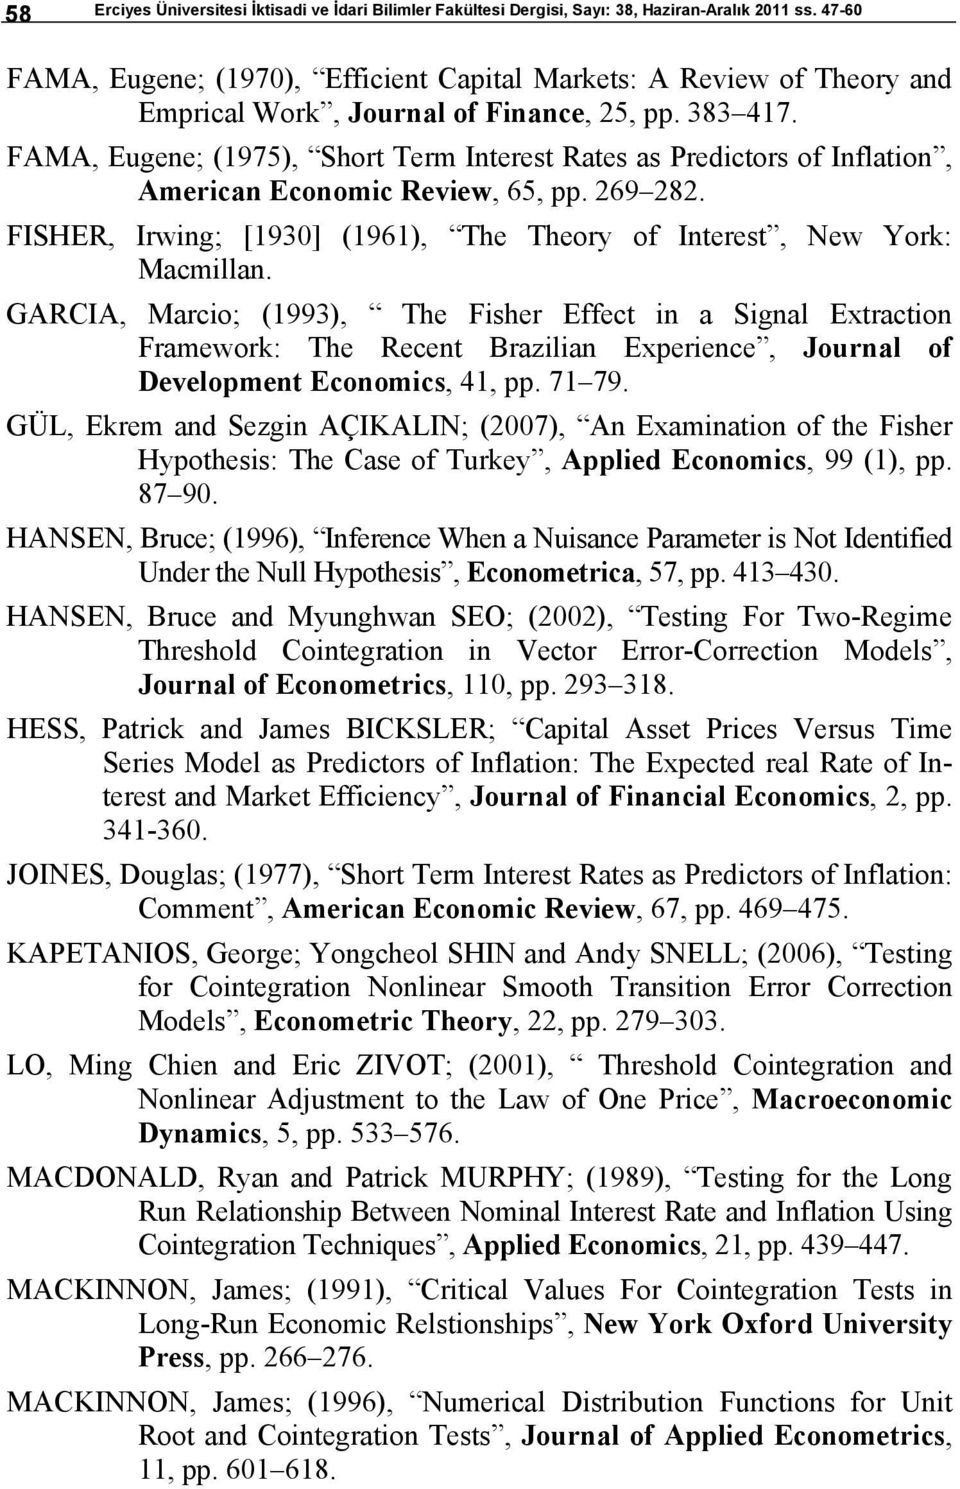 FAMA, Eugene; (975), Shor Term Ineres Raes as Predicors of Inflaion, American Economic Review, 65, pp. 269 282. FISHER, Irwing; [930] (96), The Theory of Ineres, New York: Macmillan.